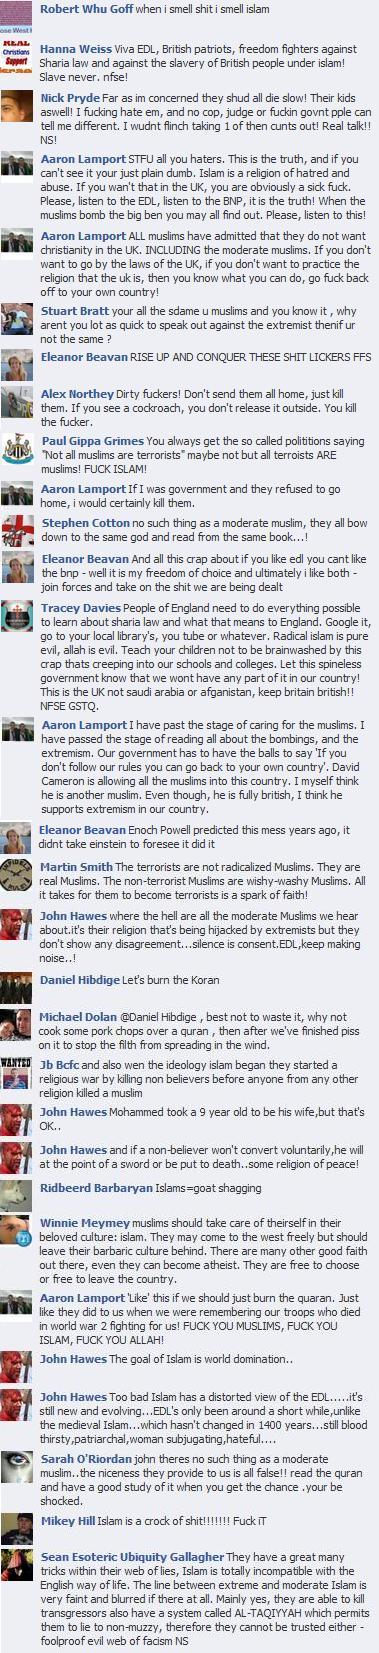 EDL Islam Facebook comments